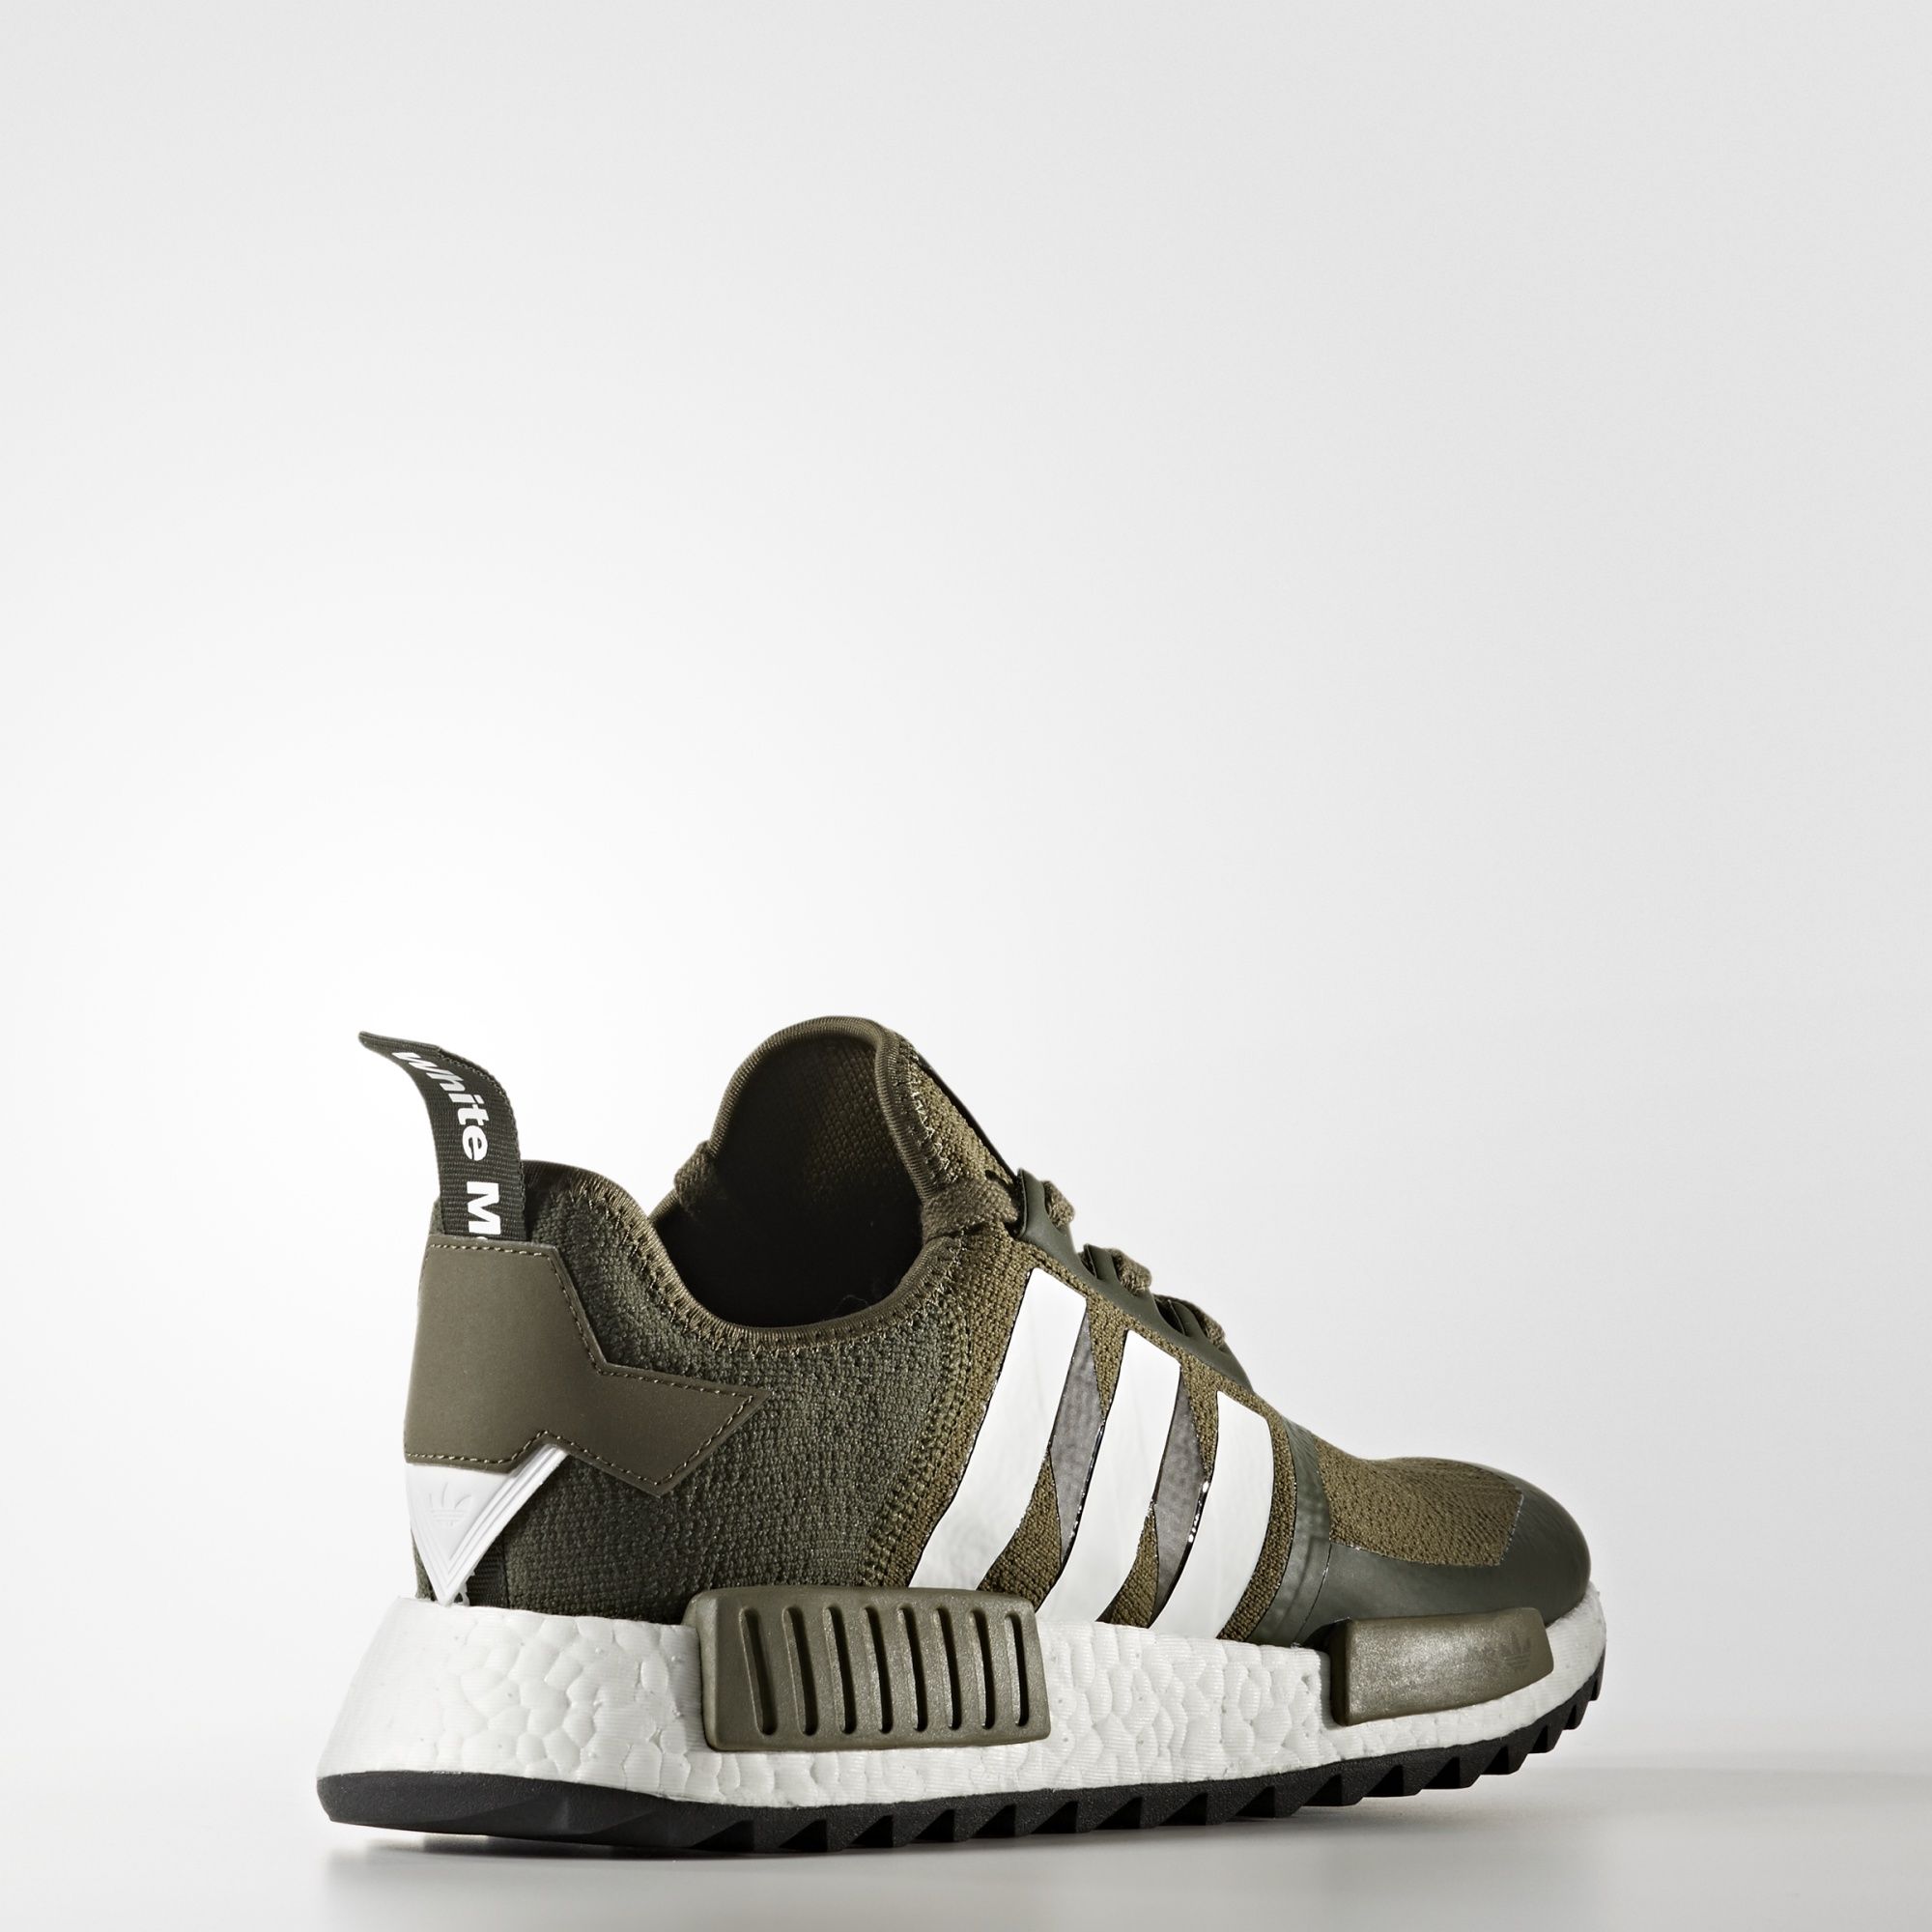 Adidas x White Mountaineering
NMD_R1 Trail Primeknit
Trace Olive / Footwear White